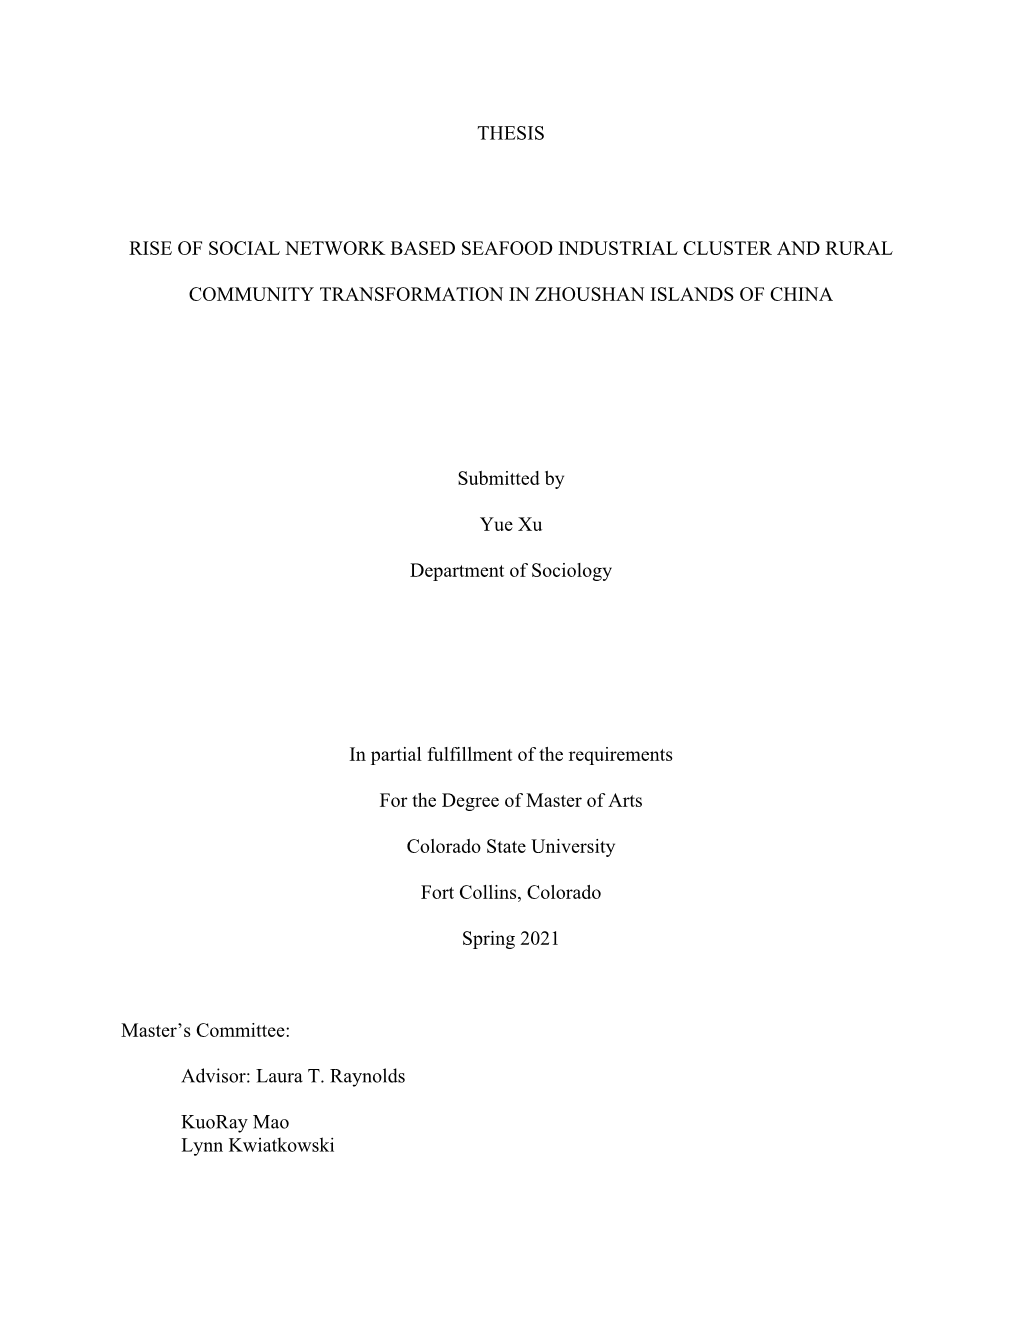 Thesis Rise of Social Network Based